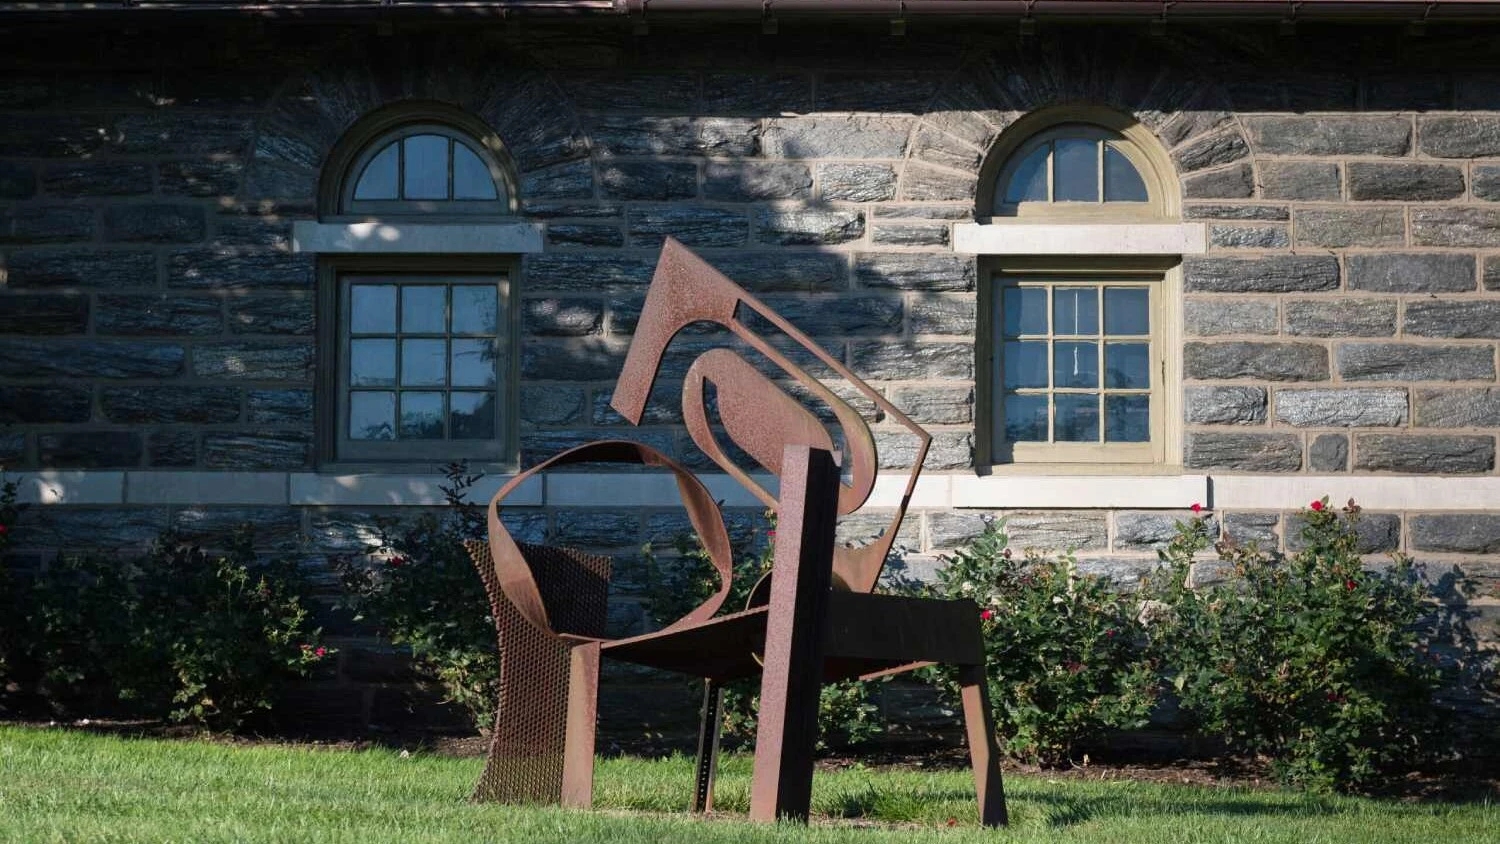 a metal sculpture composed of various geometric shapes in front of a stone building